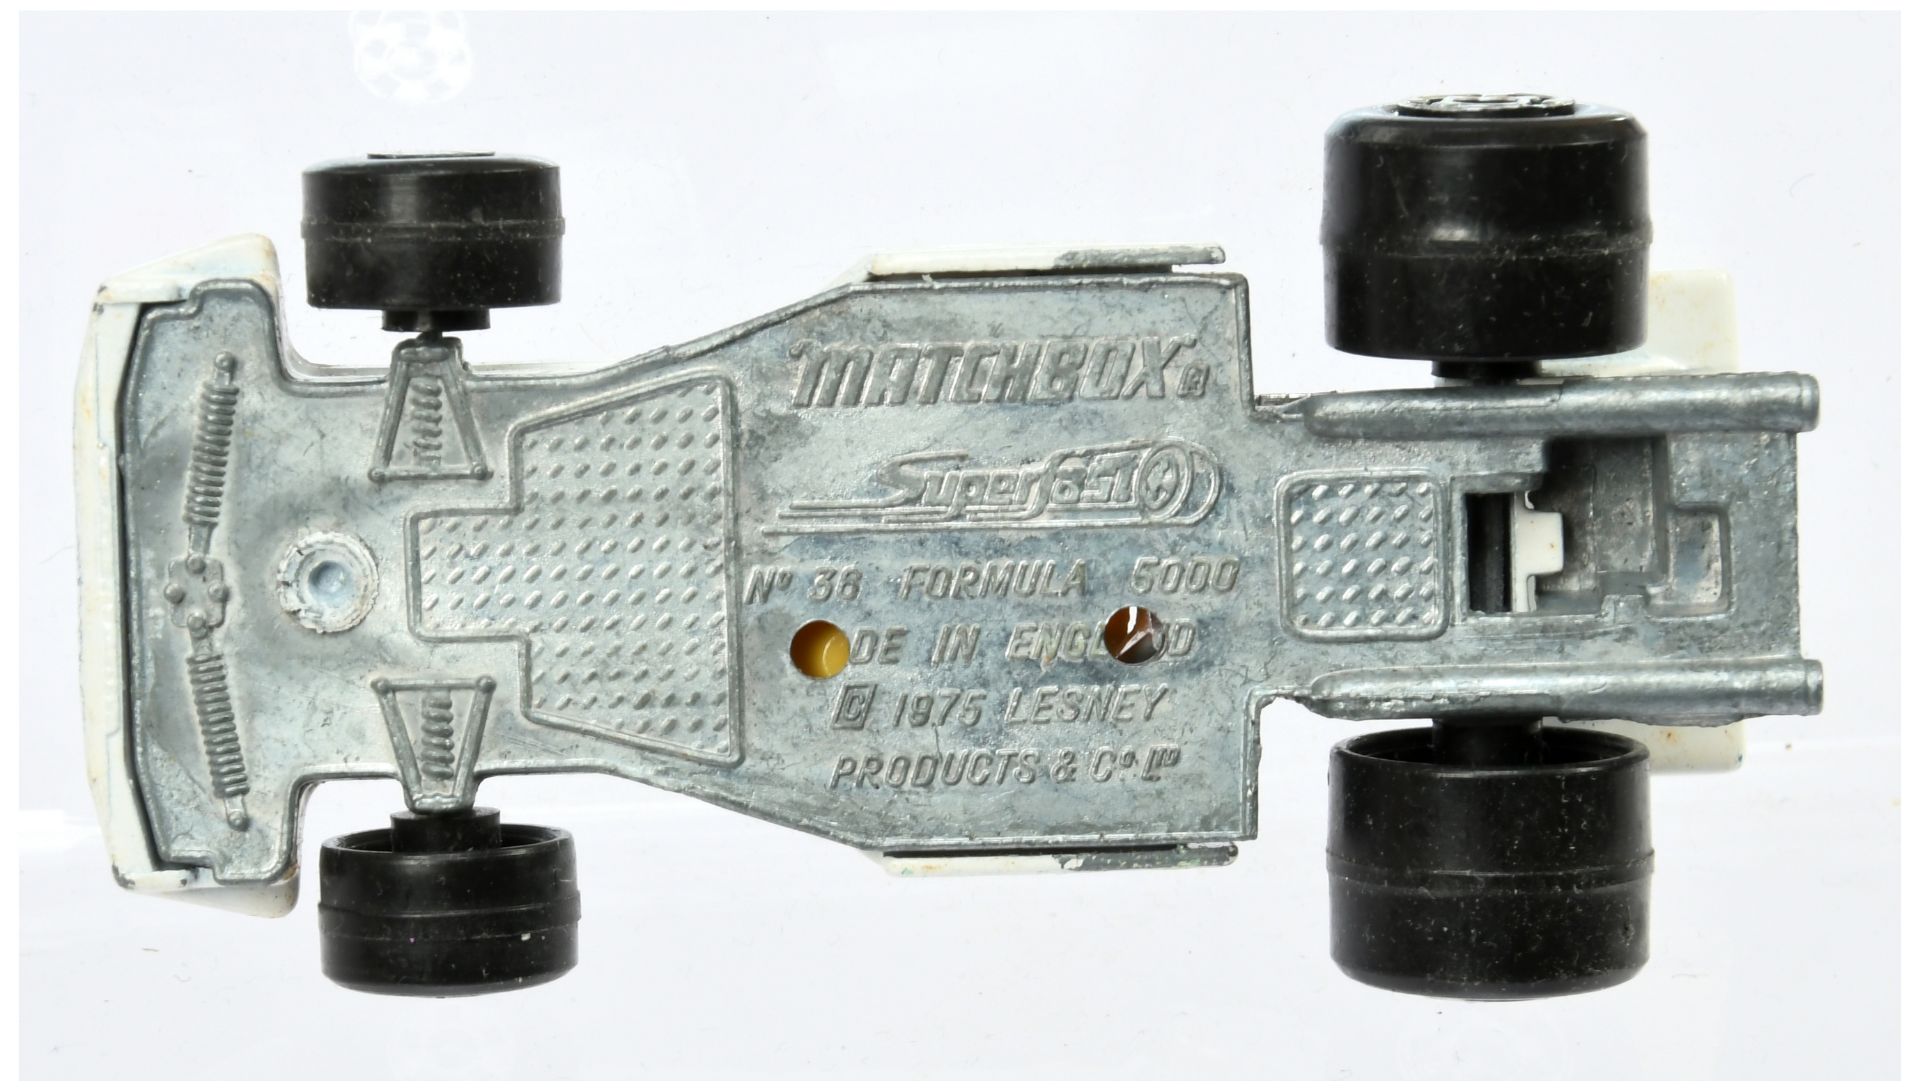 Matchbox Superfast 36c Formula 5000 Racing Car MADE IN BRAZIL ISSUE - Image 3 of 3